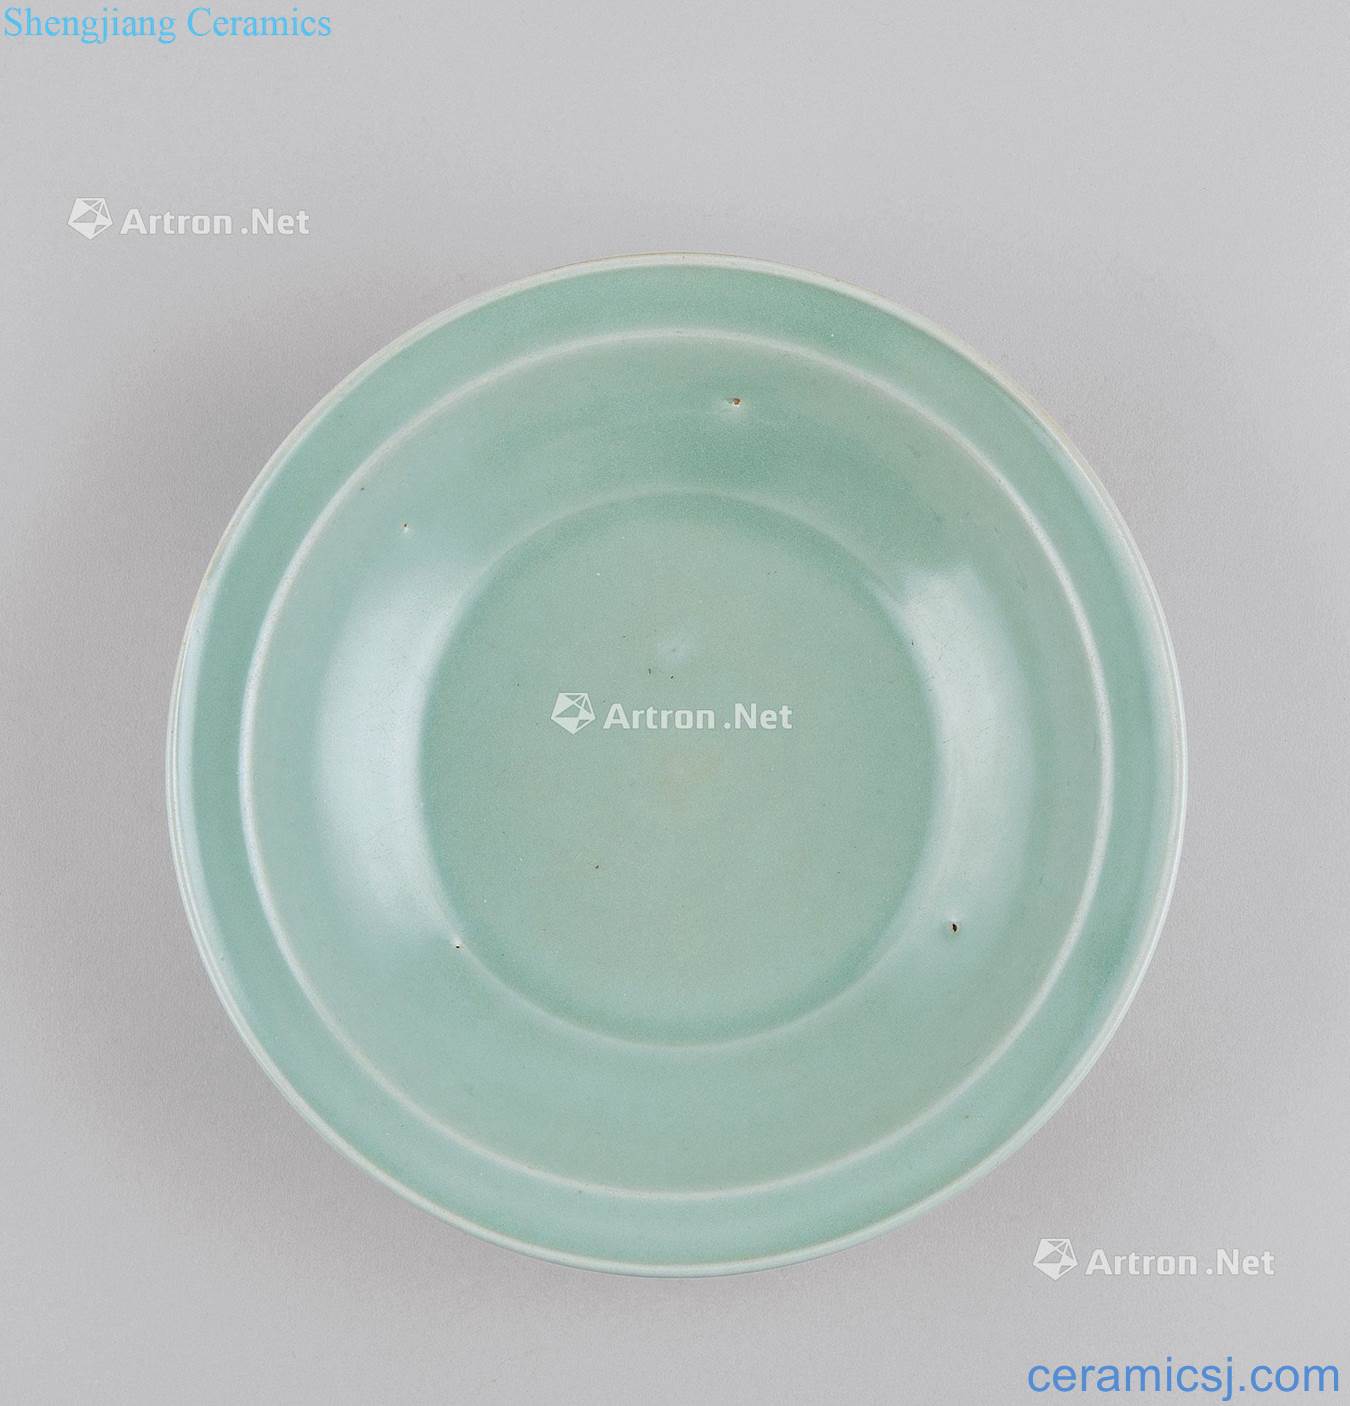 Longquan celadon plate of the Ming dynasty (1368-1644)